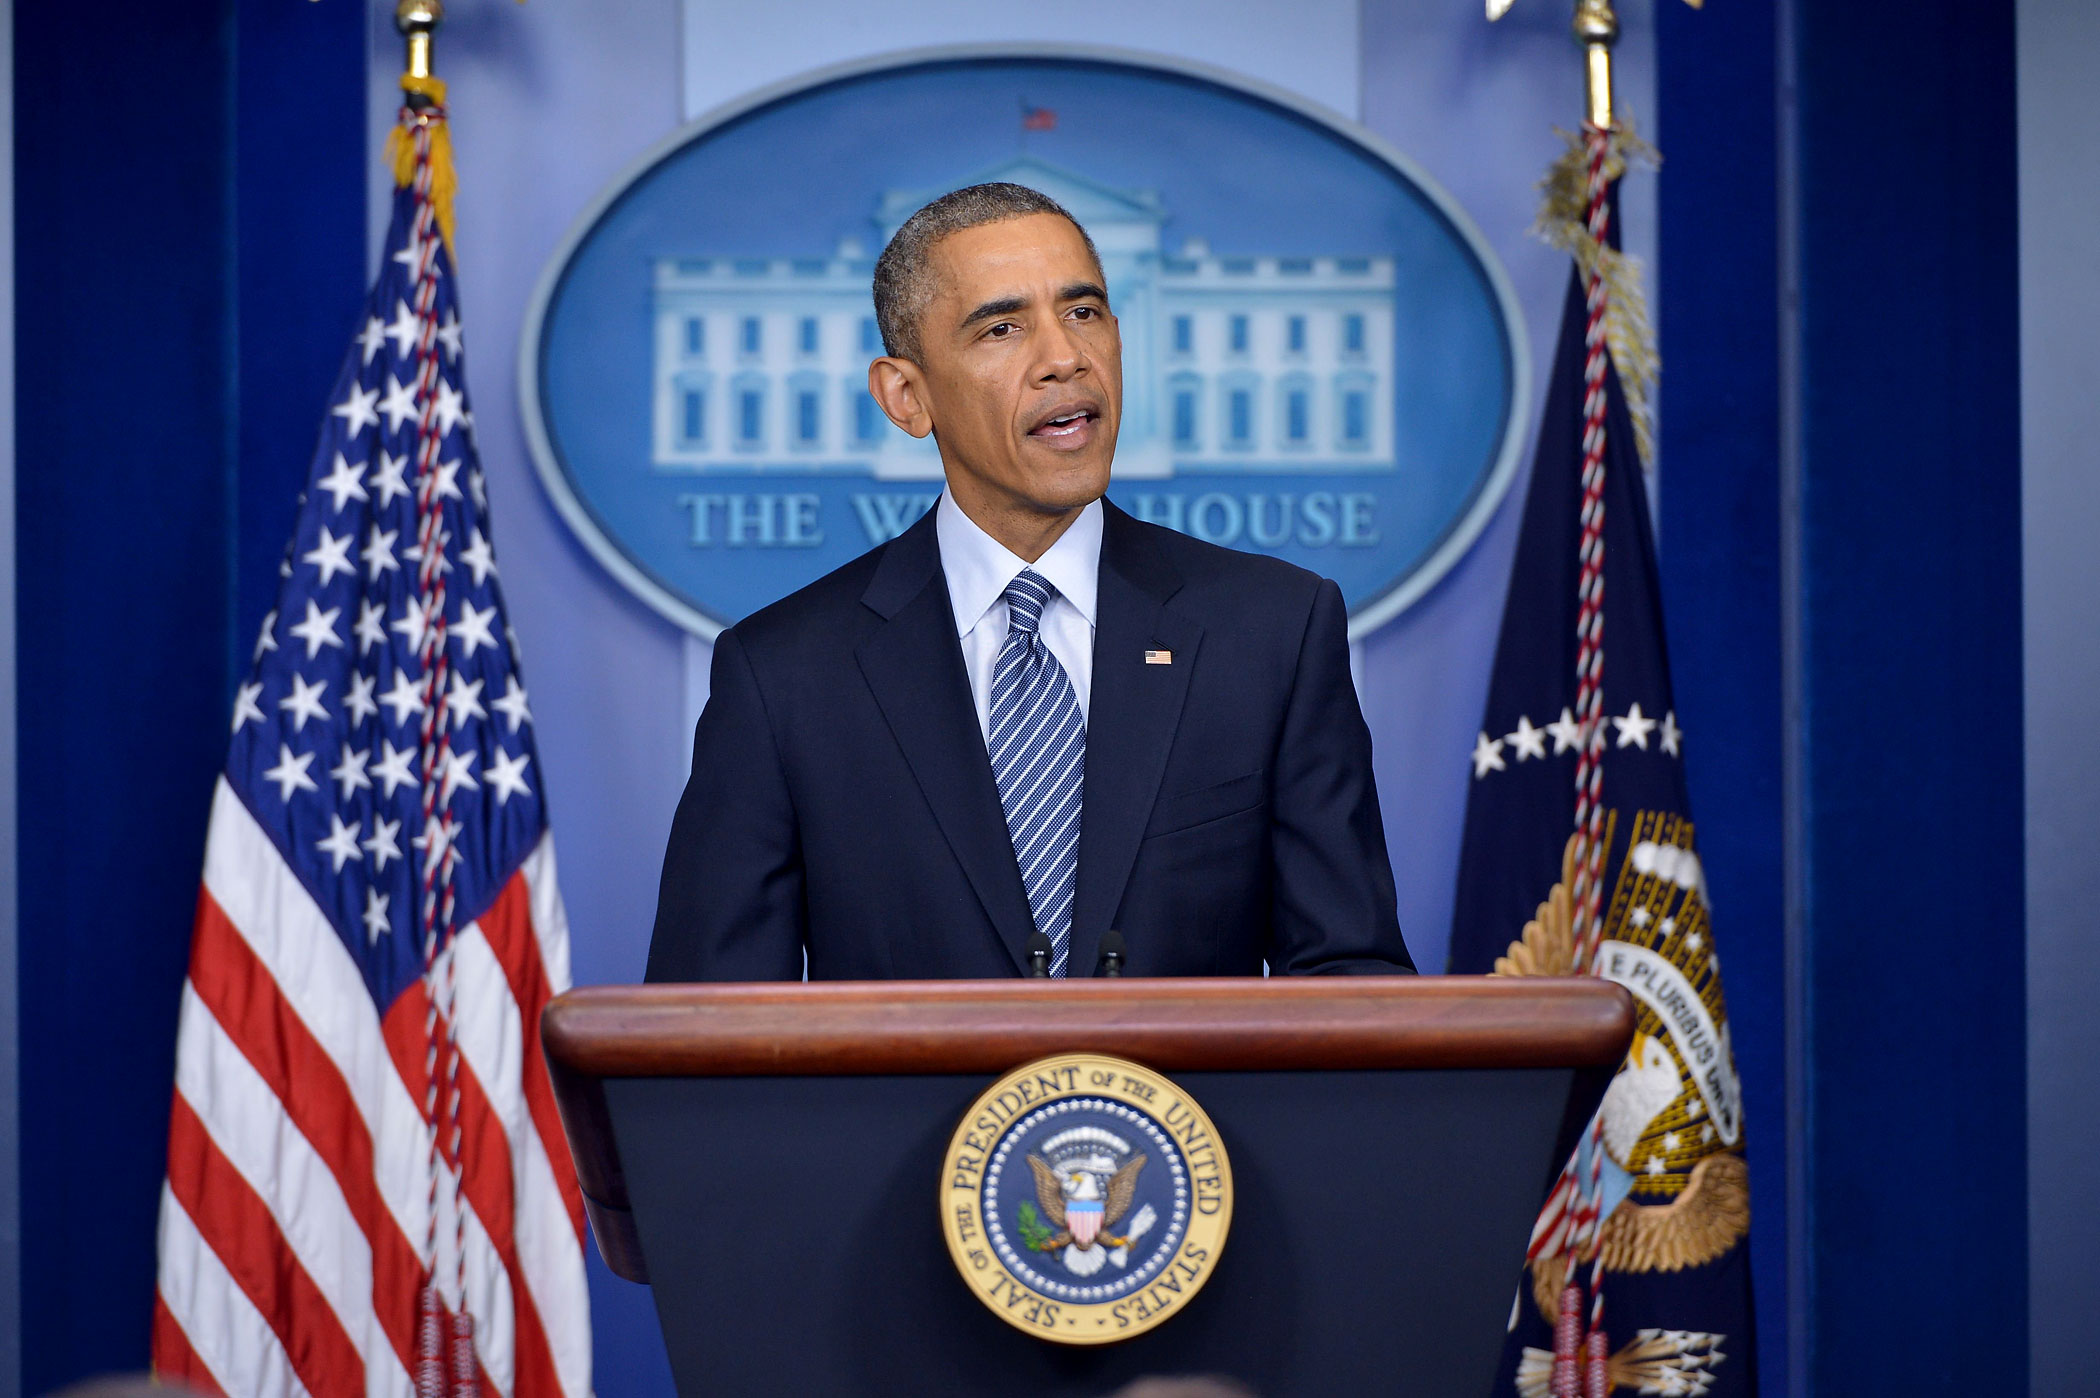 US President Barack Obama speaks following the announcement of the decision in the case of Ferguson police officer Darren Wilson for the shooting death of teenager Michael Brown, in the Brady Briefing Room of the White House on November 24, 2014 in Washington, DC. (Mandel Ngan—AFP/Getty Images)